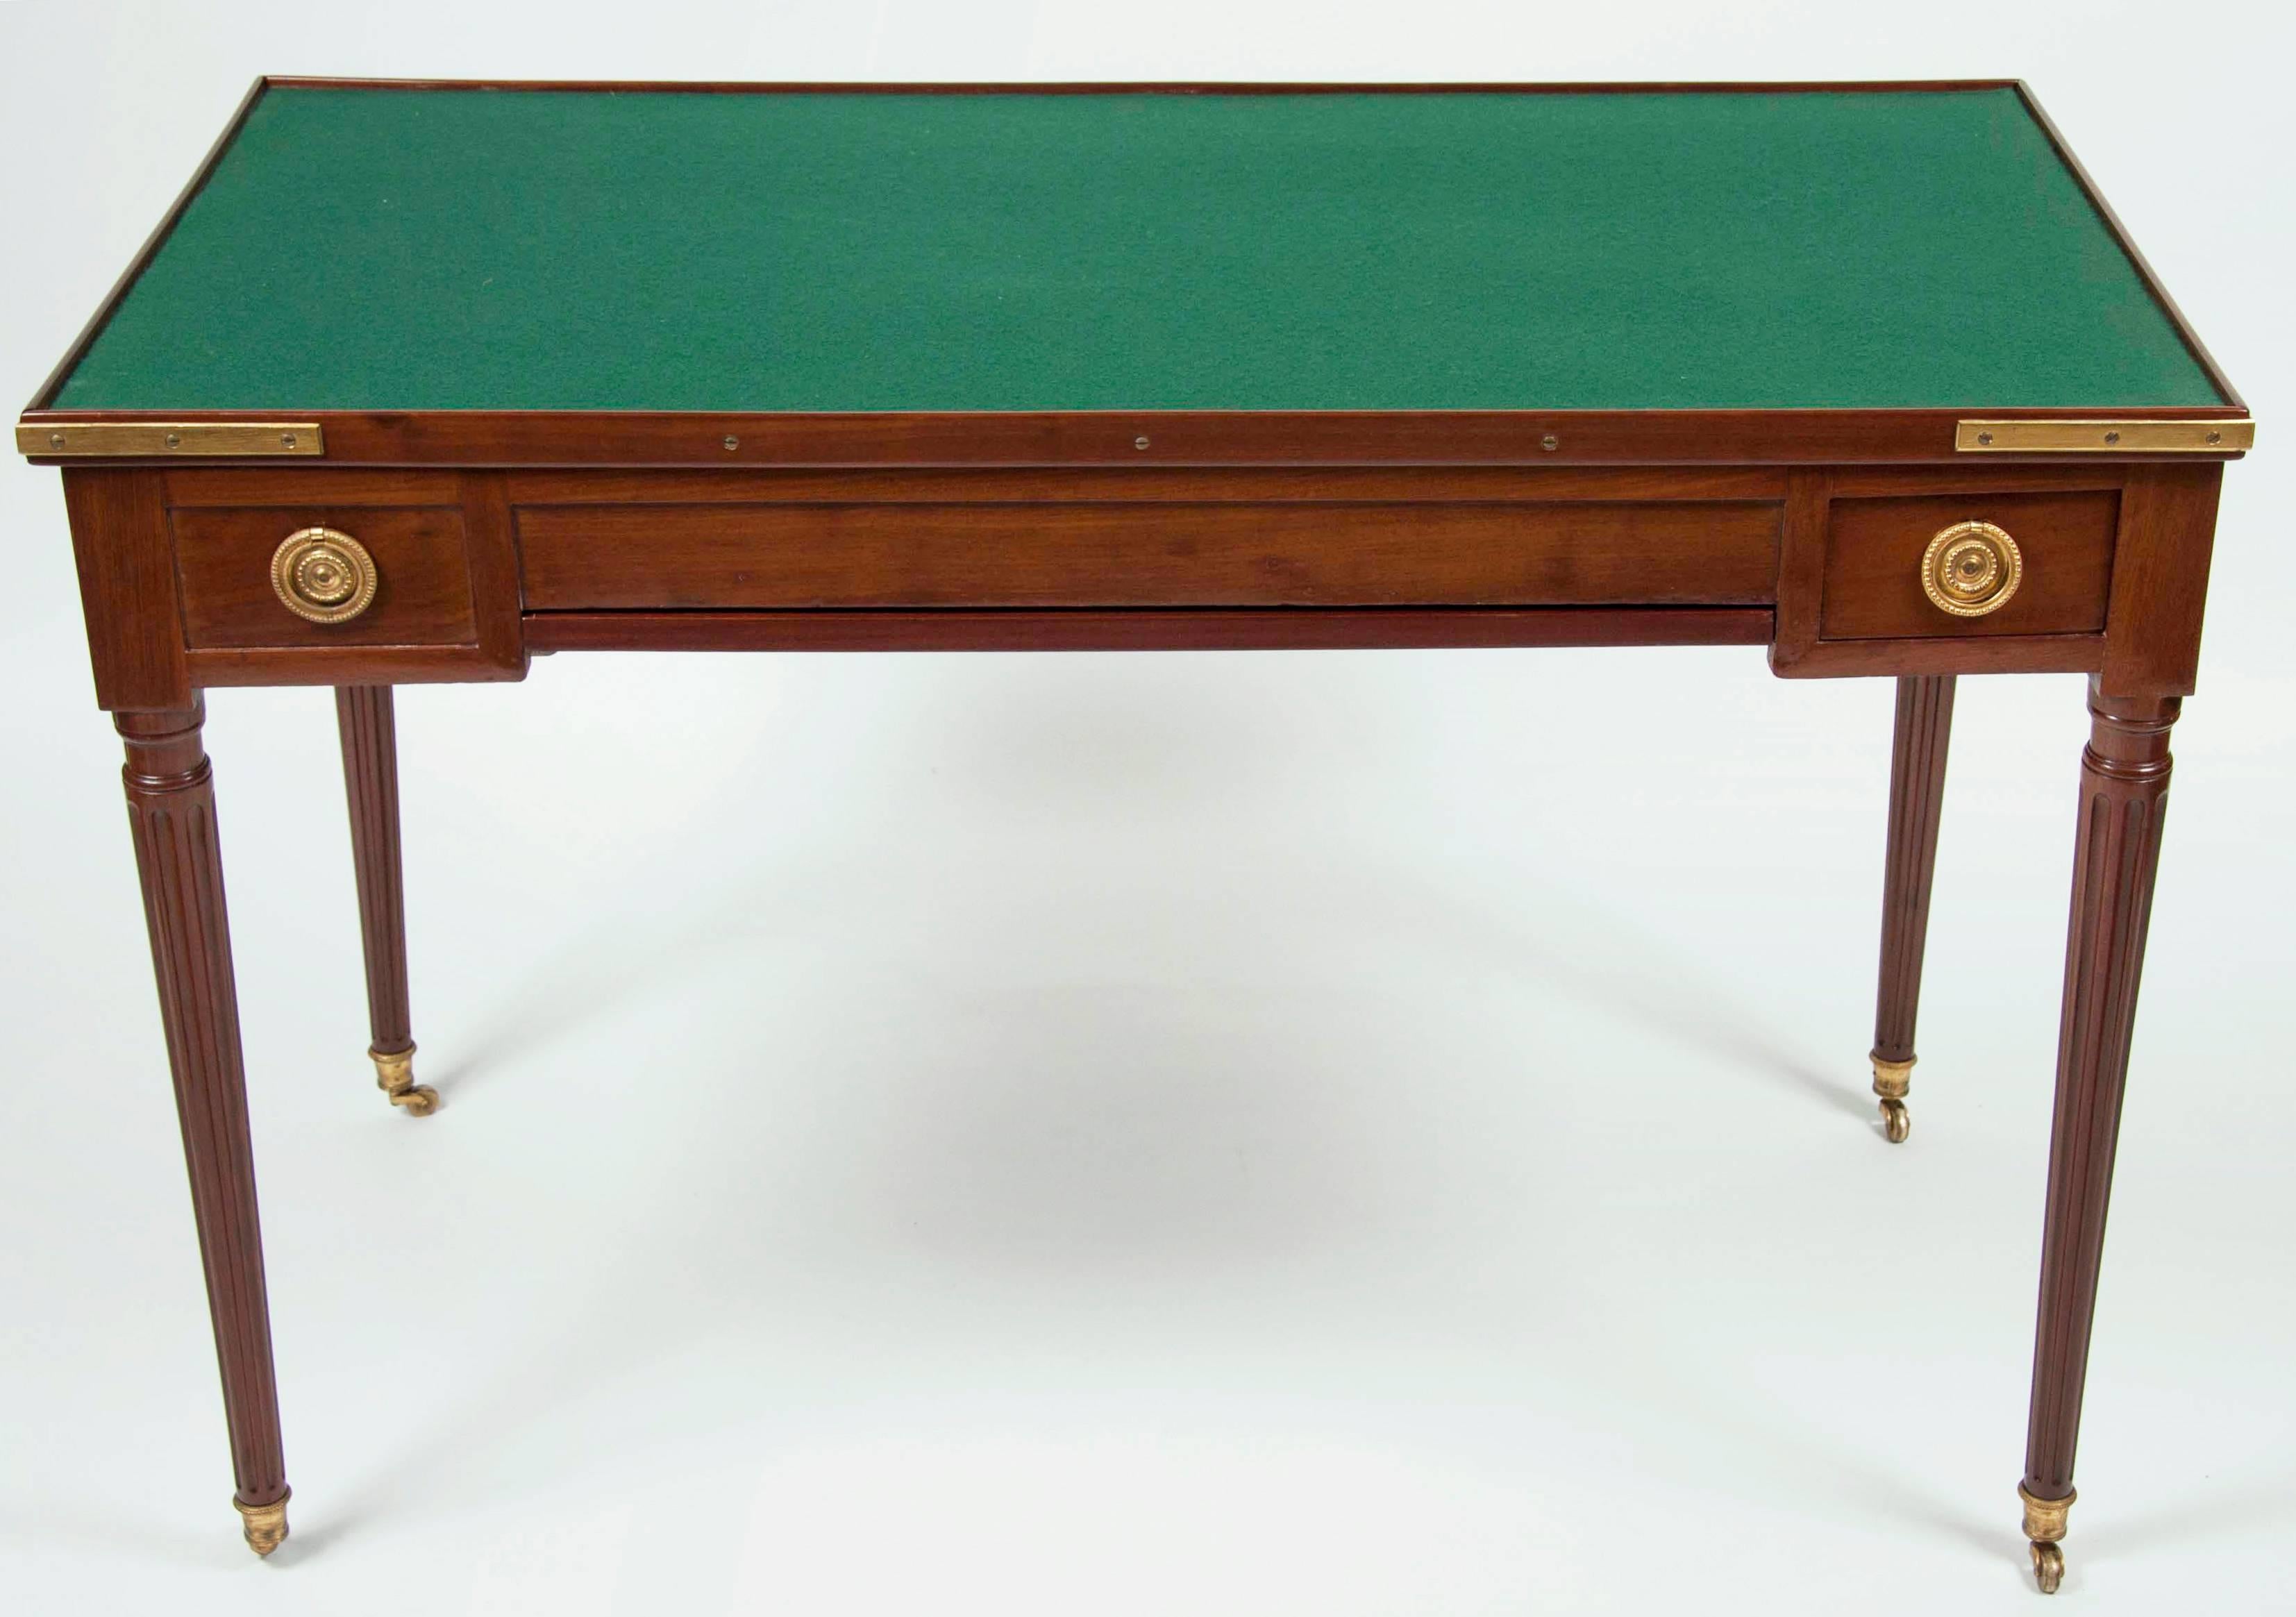 Late 18th Century Fine Louis XVI Mahogany and Inlaid Tric Trac Table For Sale